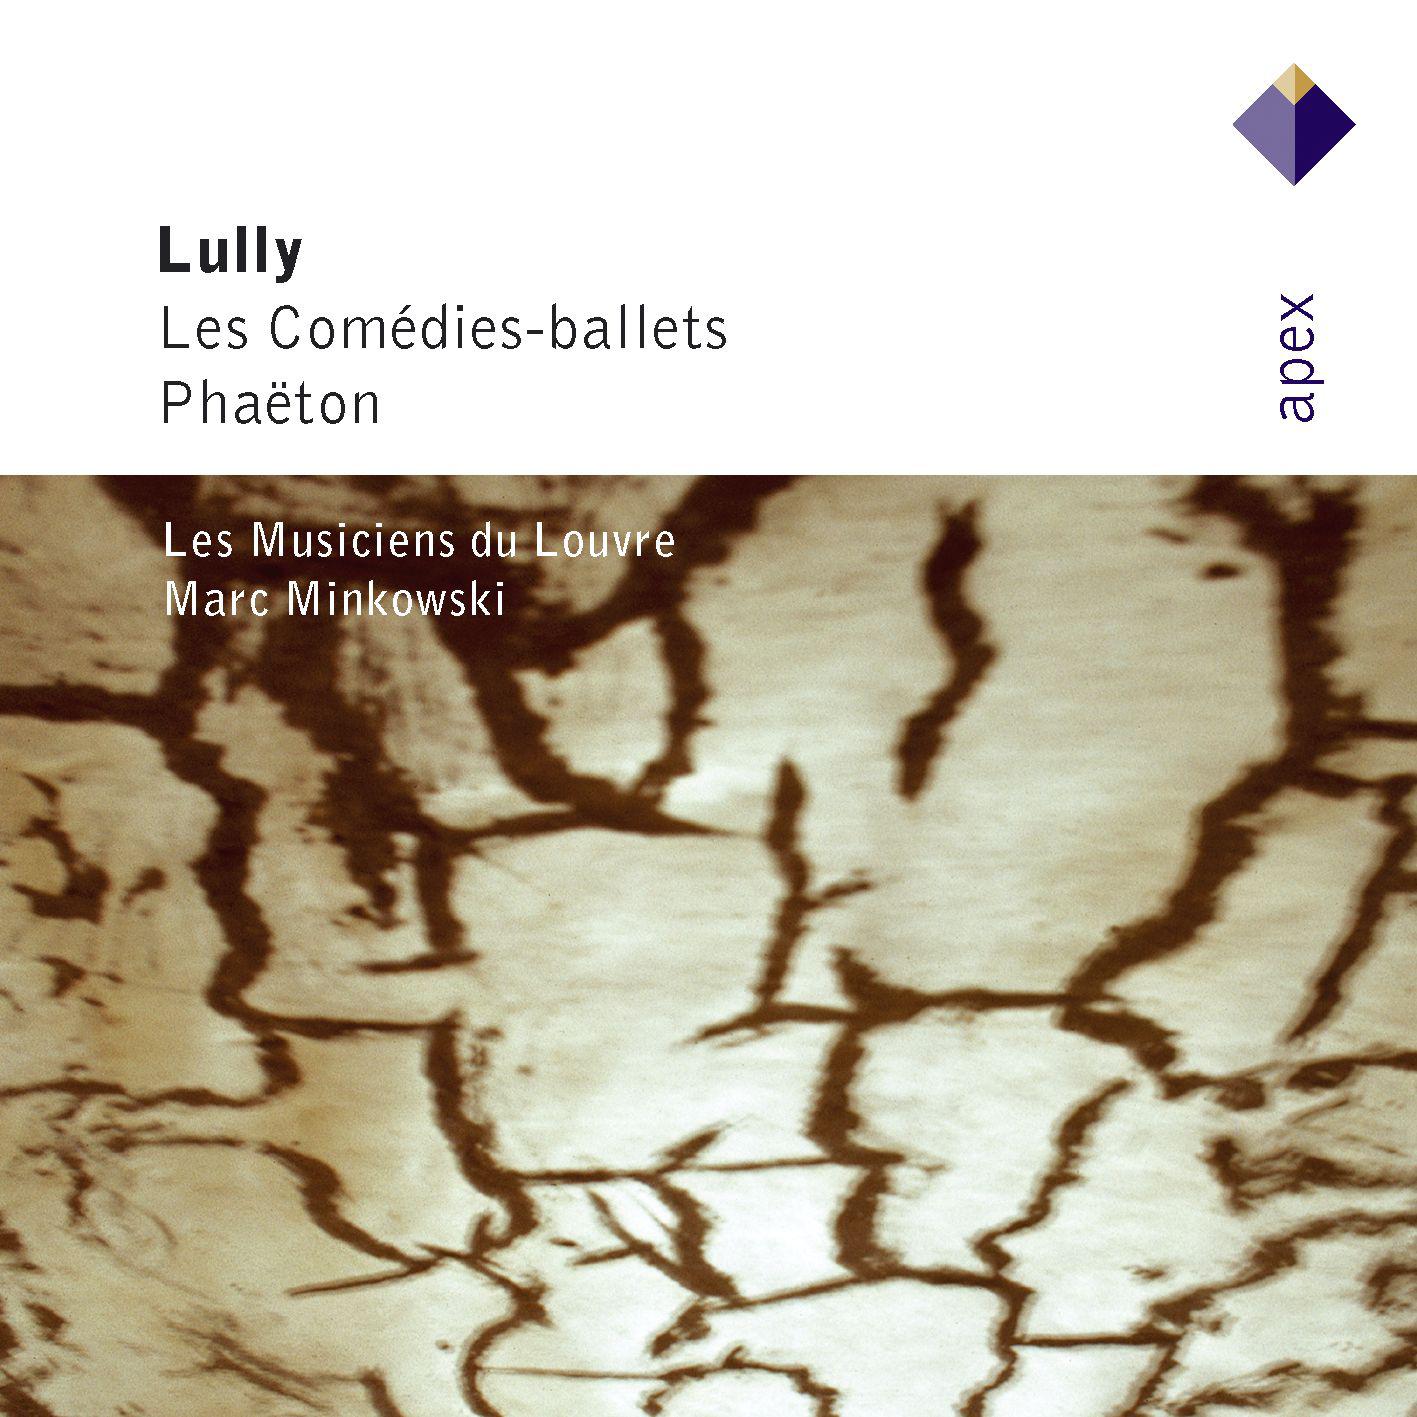 Lully: Pha ton : Act 2 Chaconne